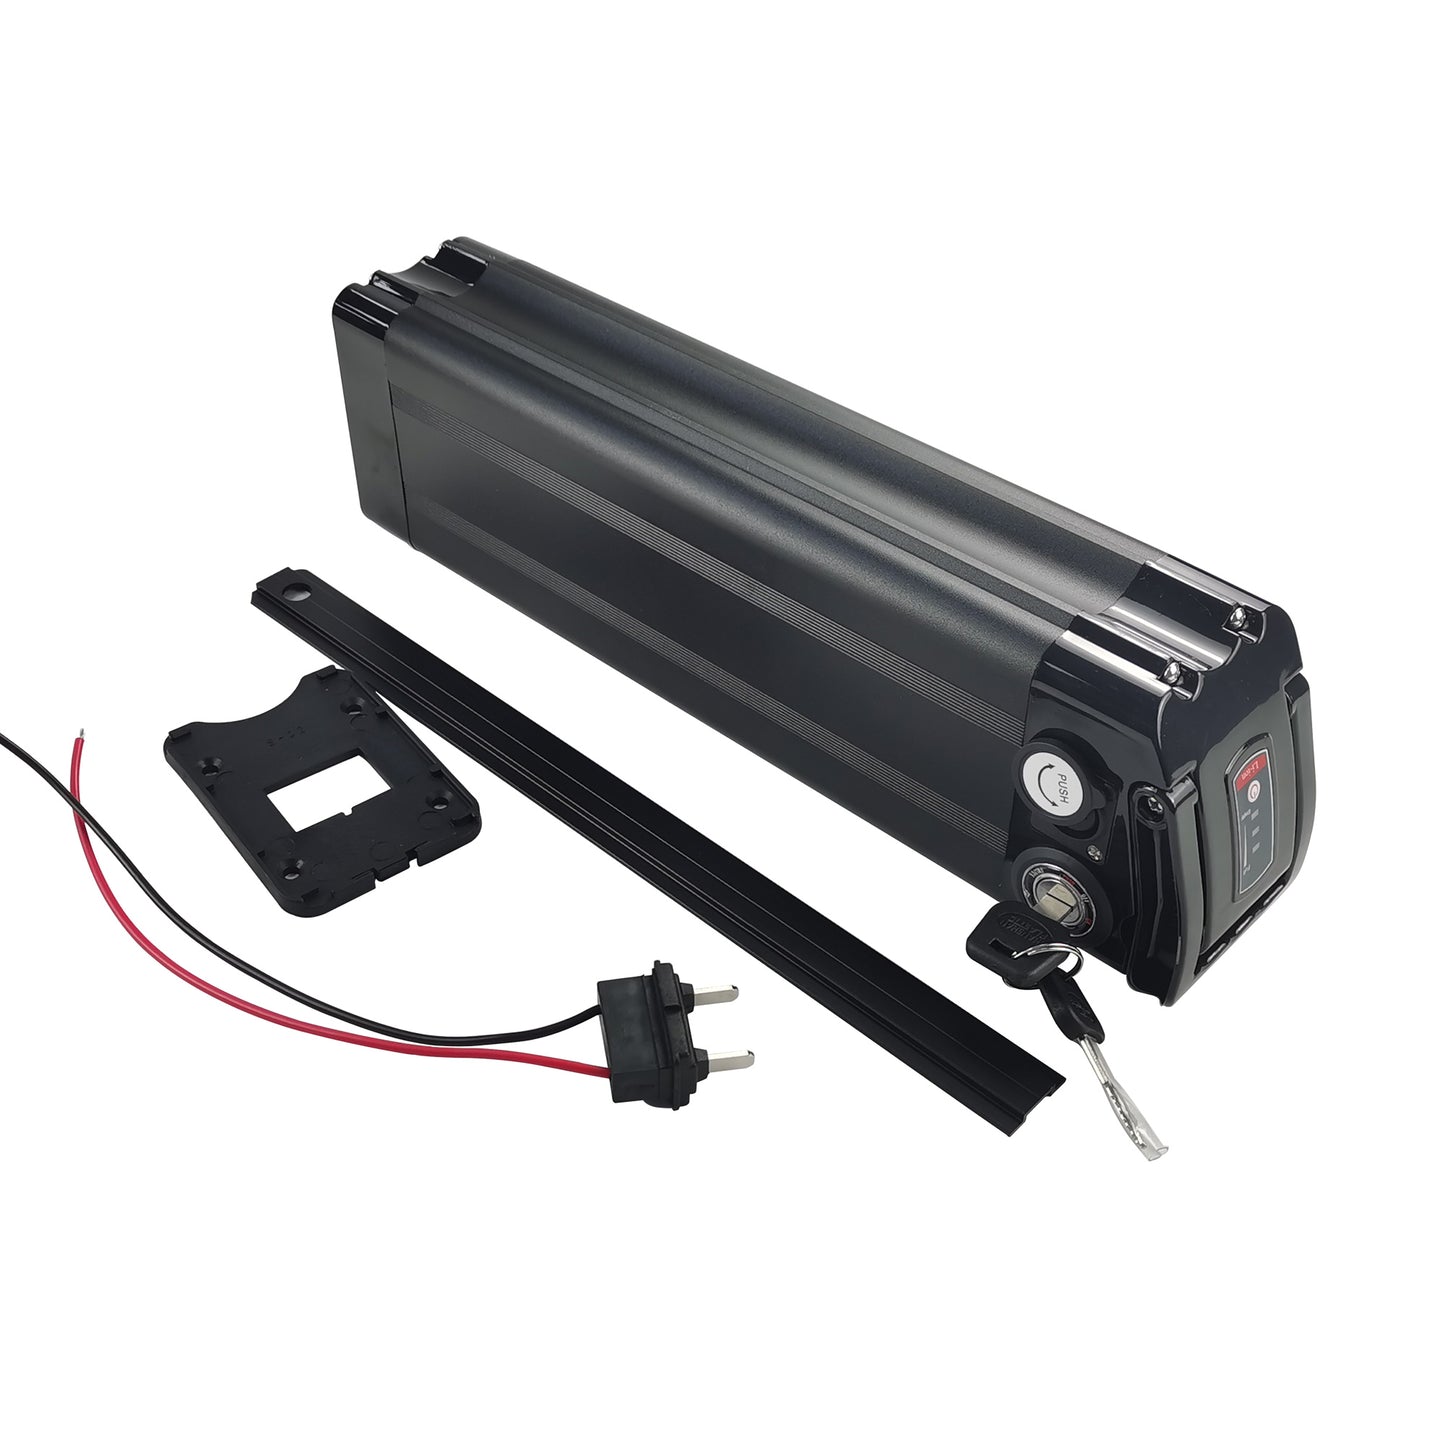 Spain Stock 48V14AH Silver Fish ebike battery Panasonic cell 30A BMS support 1400W motor included 3A charger